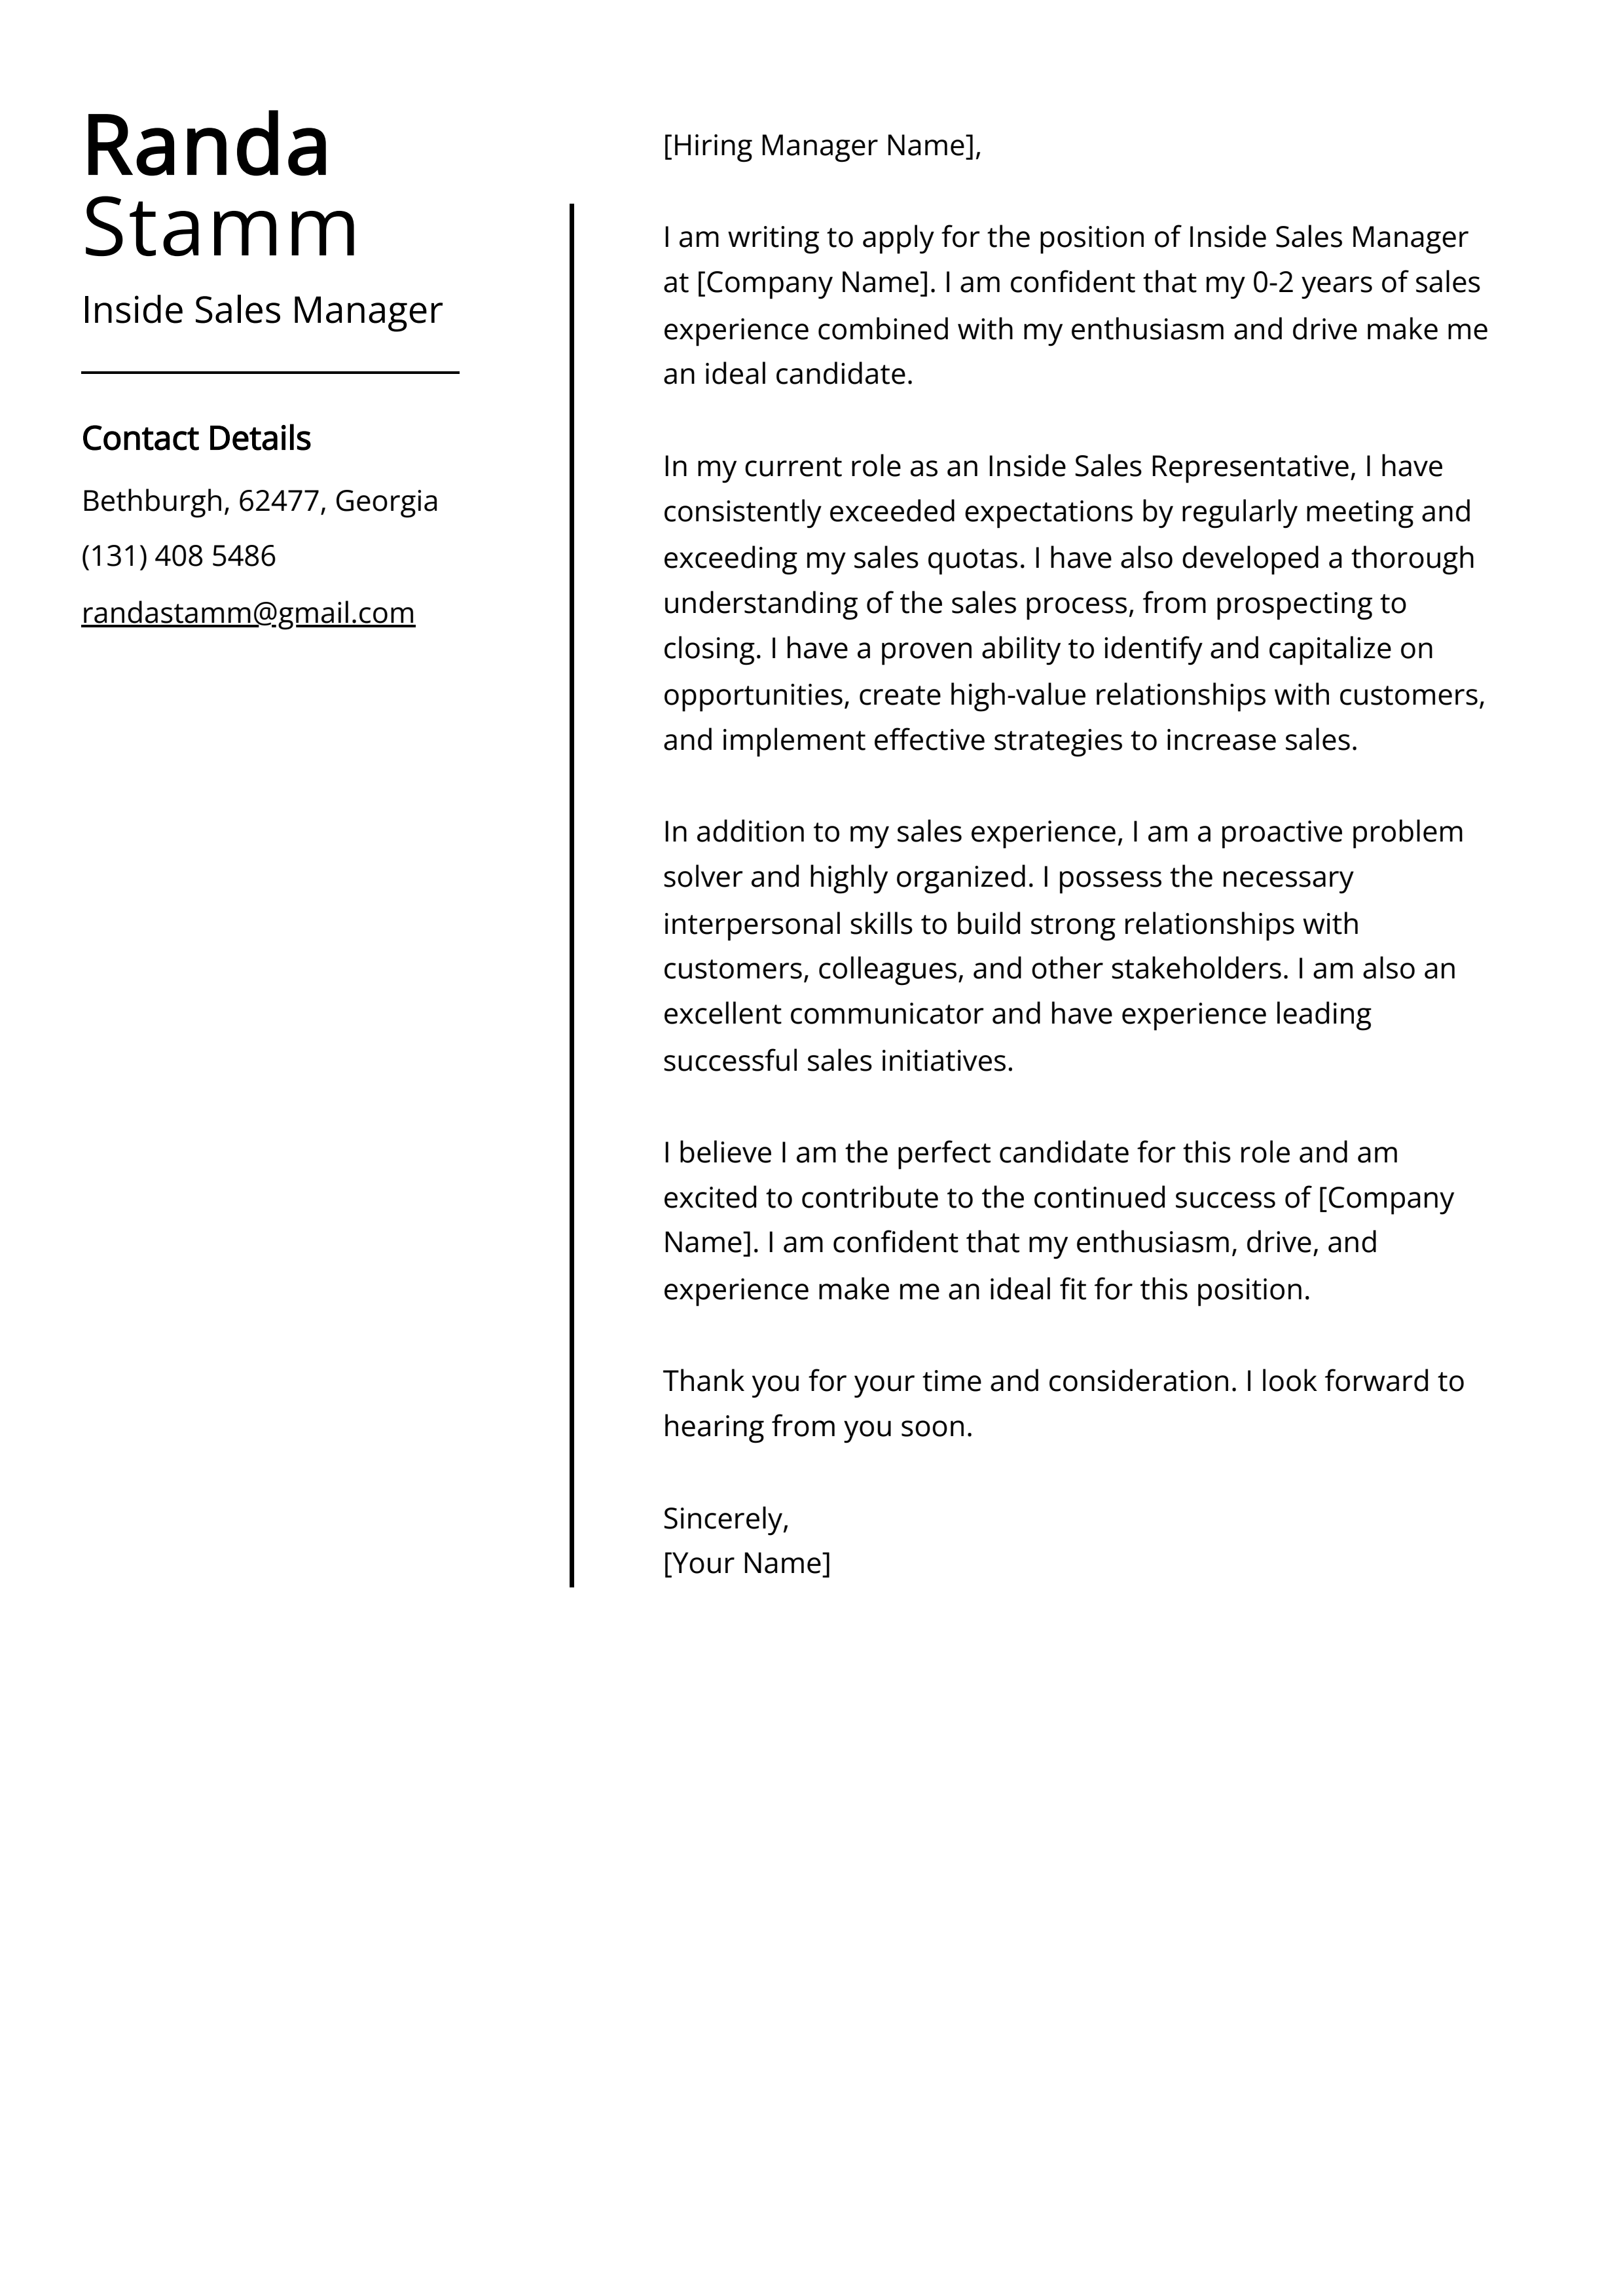 Inside Sales Manager Cover Letter Example